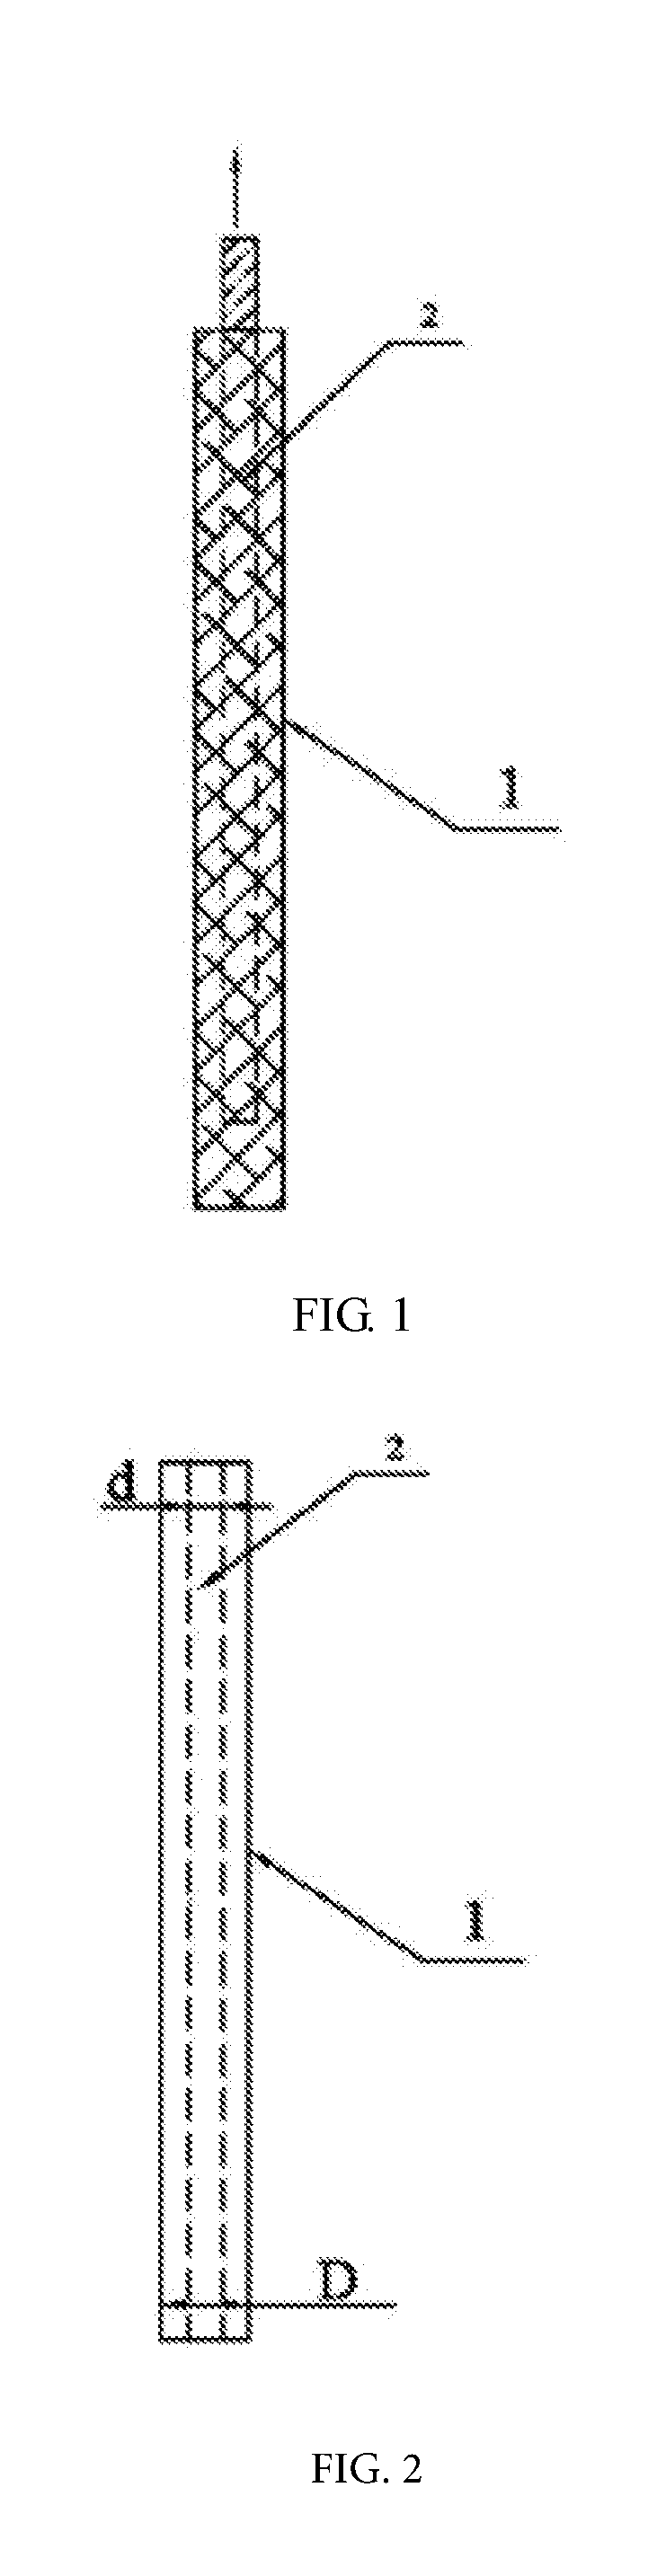 Sheath for Bra Wire Ring and Method for Manufacturing Bras Using the Same